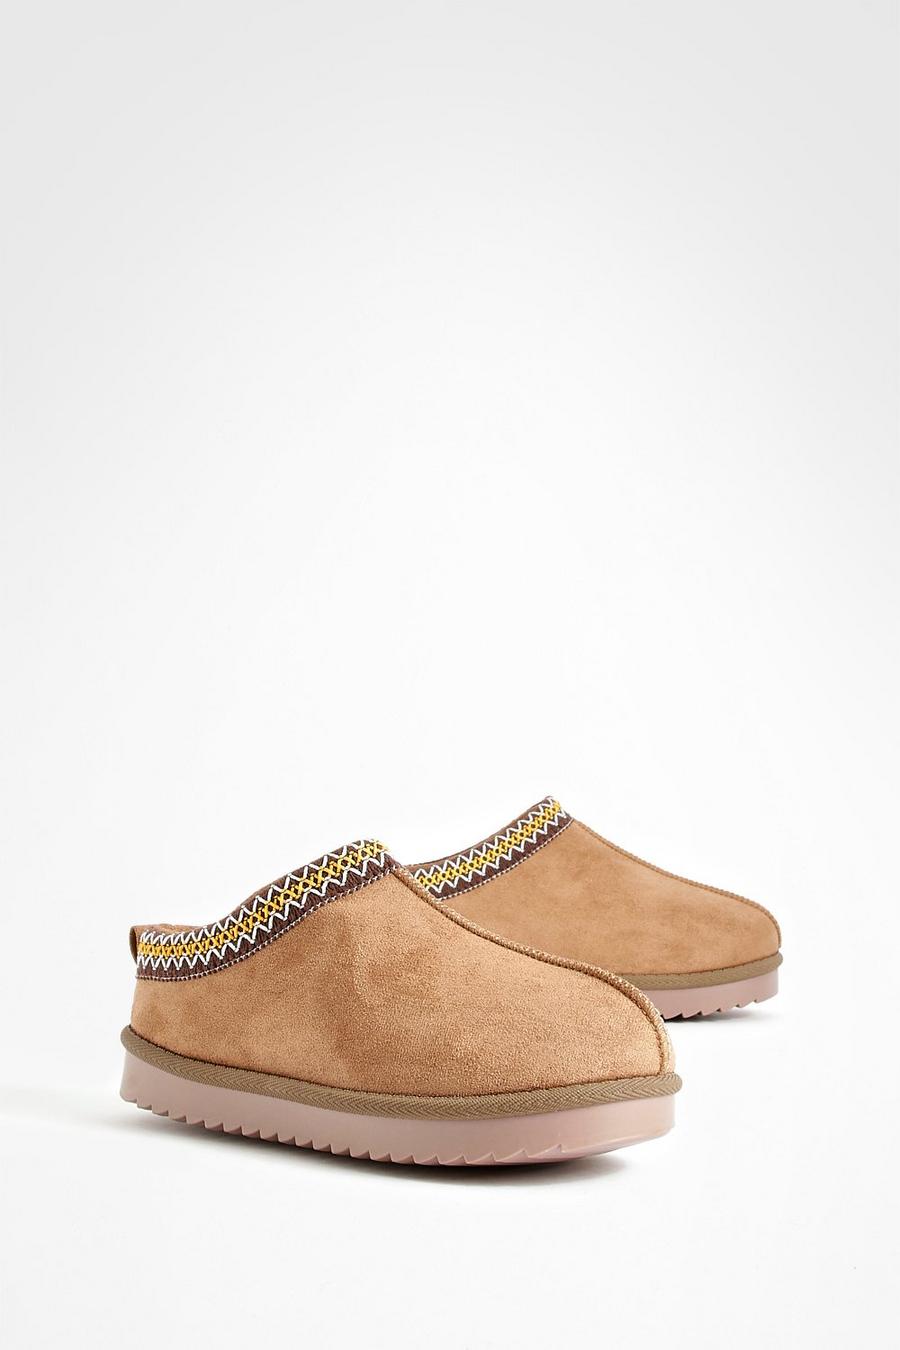 Chestnut Embroidered  Slip On Cosy Mules      